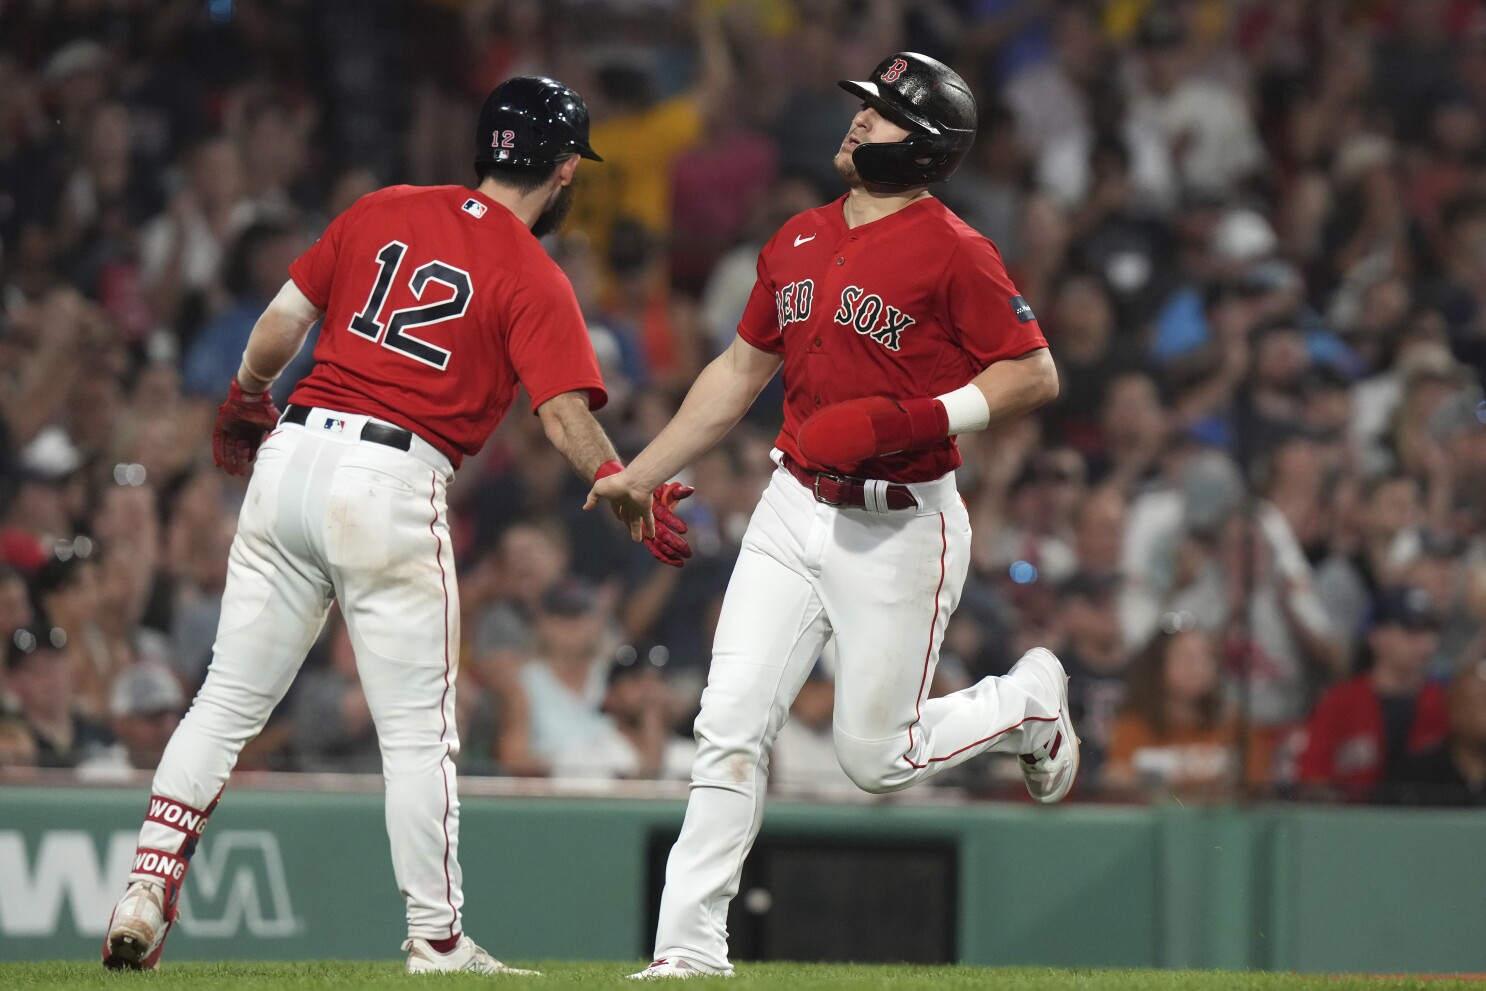 Boston Red Sox advance to ALCS with 6-5 win over Rays; Kiké Hernández hits  walk-off sacrifice fly in ninth inning of Game 4 